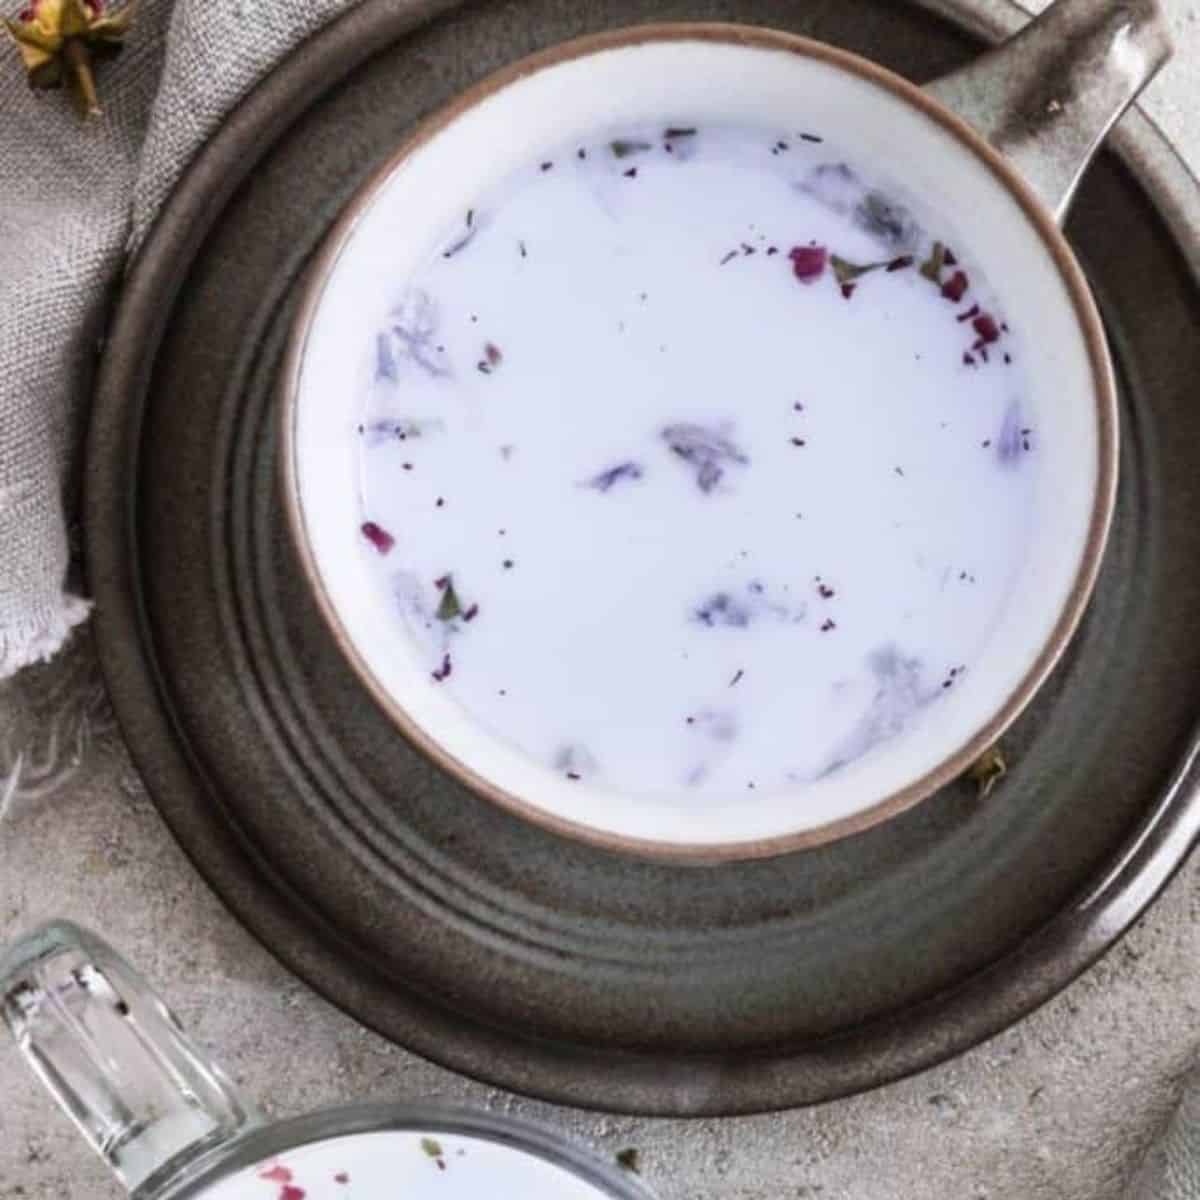 Relaxing Moon Milk made with blueberries.